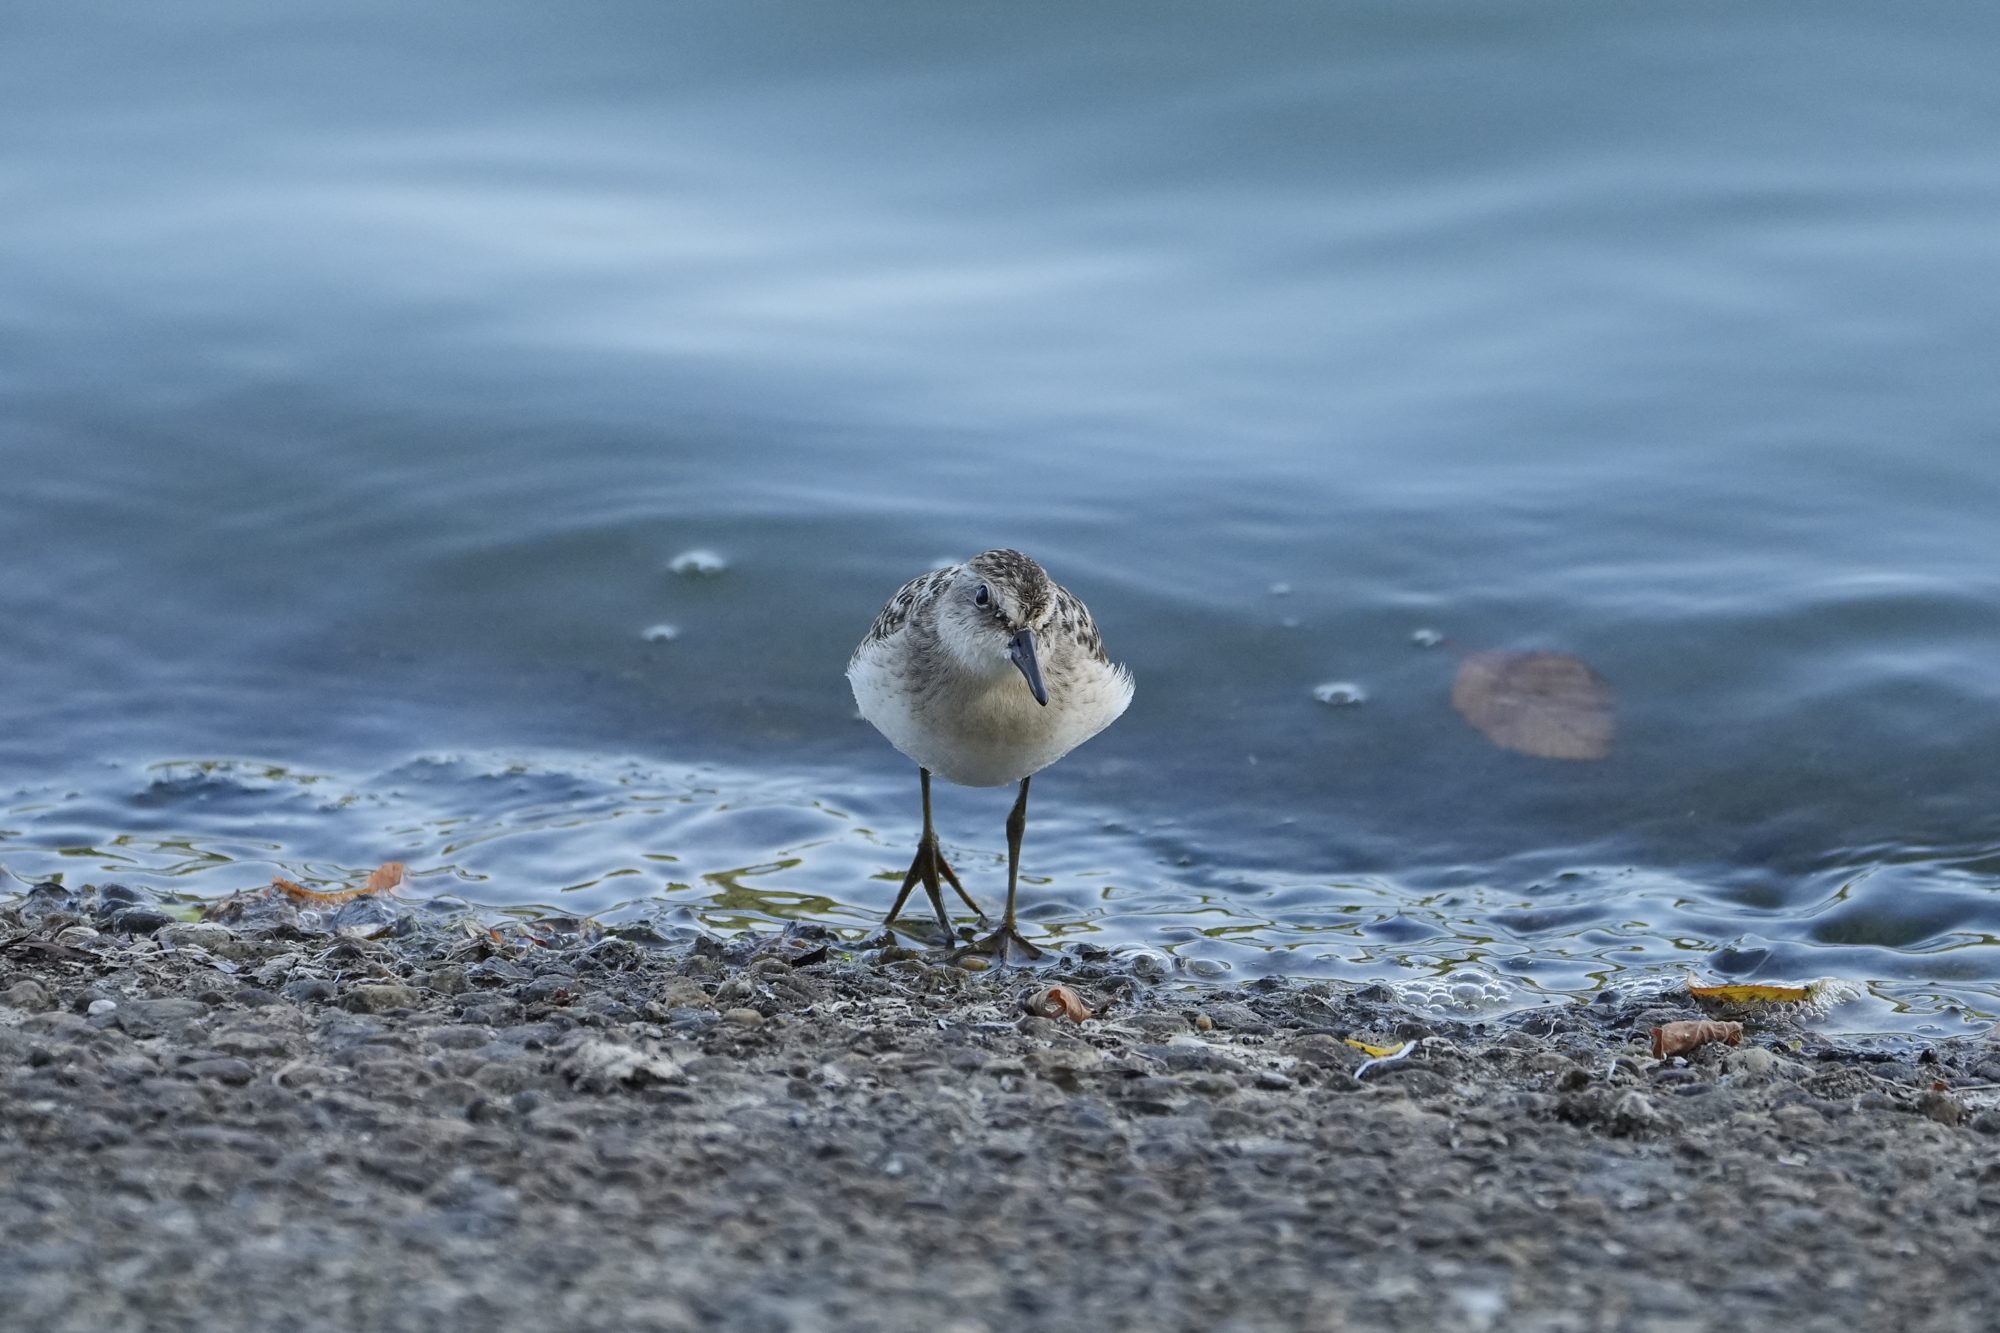 A Semipalmated Sandpiper at the water's edge, walking in my general direction